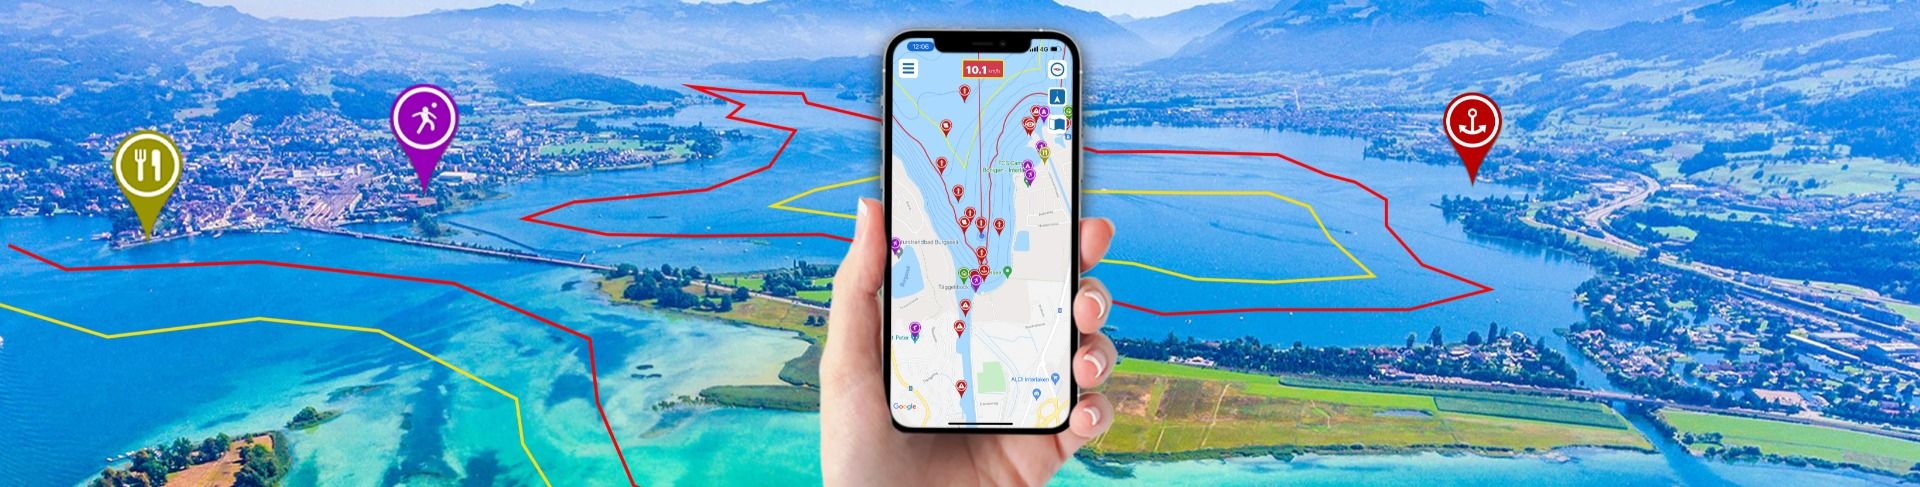 /e/boatdriver-guide-app-swiss-lakes-access-1-year-iosandroid